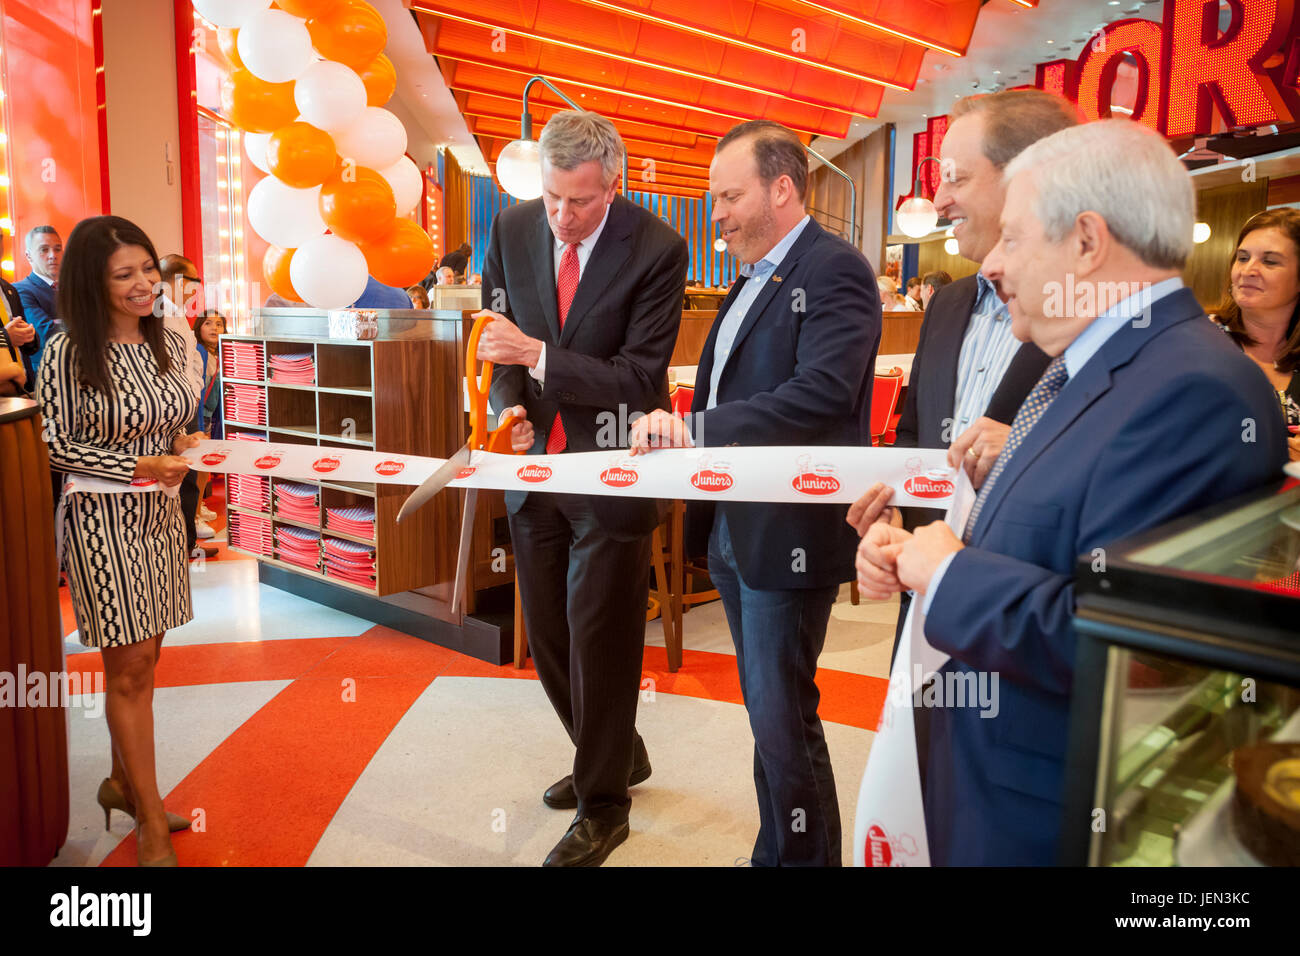 New York, USA. 26th June, 2017. New York Mayor Bill de Blasio, left, and Junior's co-owner Alan Rosen, right, cut the ribbon at the ceremonial opening of the second Times Square branch of Junior's Restaurant. in the former Ruby Foo's space, on Monday, June 26, 2017. The original Junior's is located in Downtown Brooklyn and is beloved for it's famous cheesecake. Junior's has opened a second space in Times Square in the now closed Ruby Foo's location. The new restaurant seats 300 people. ( © Richard B. Levine) Credit: Richard Levine/Alamy Live News Stock Photo